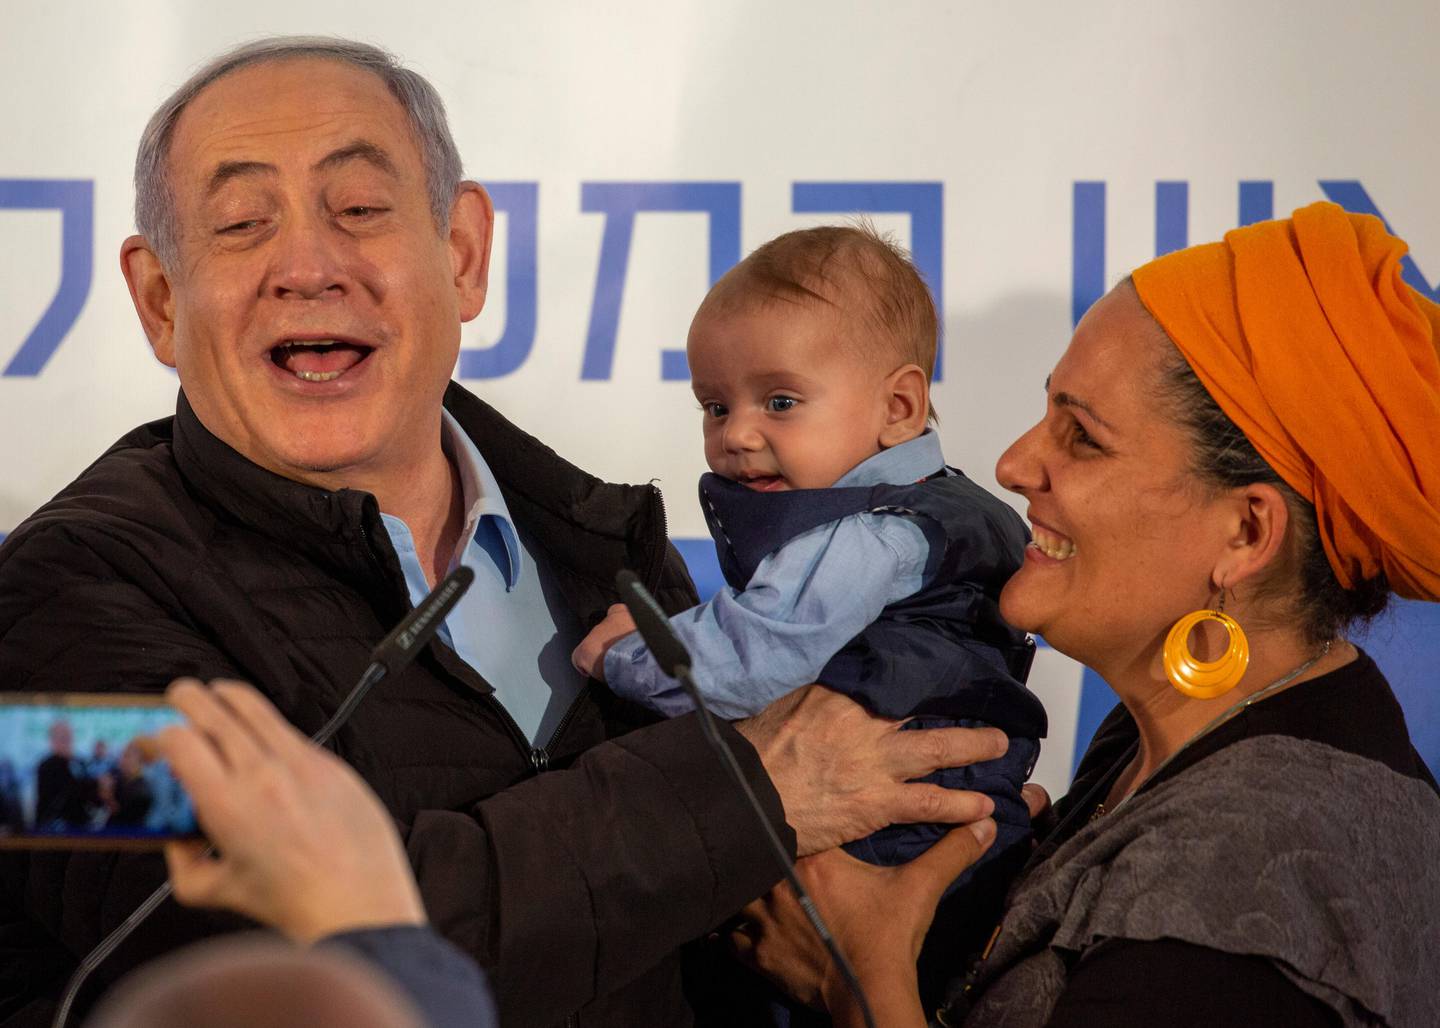 Israeli Prime Minister Benjamin Netanyahu is introduced to a baby named after him after planting a tree during an event on the Jewish holiday of Tu' BiShvat in the Jewish settlement of Mevo'ot Yericho, in the Jordan Valley near the Palestinians city of Jericho, Monday, Feb. 10, 2020. (AP Photo/Ariel Schalit)